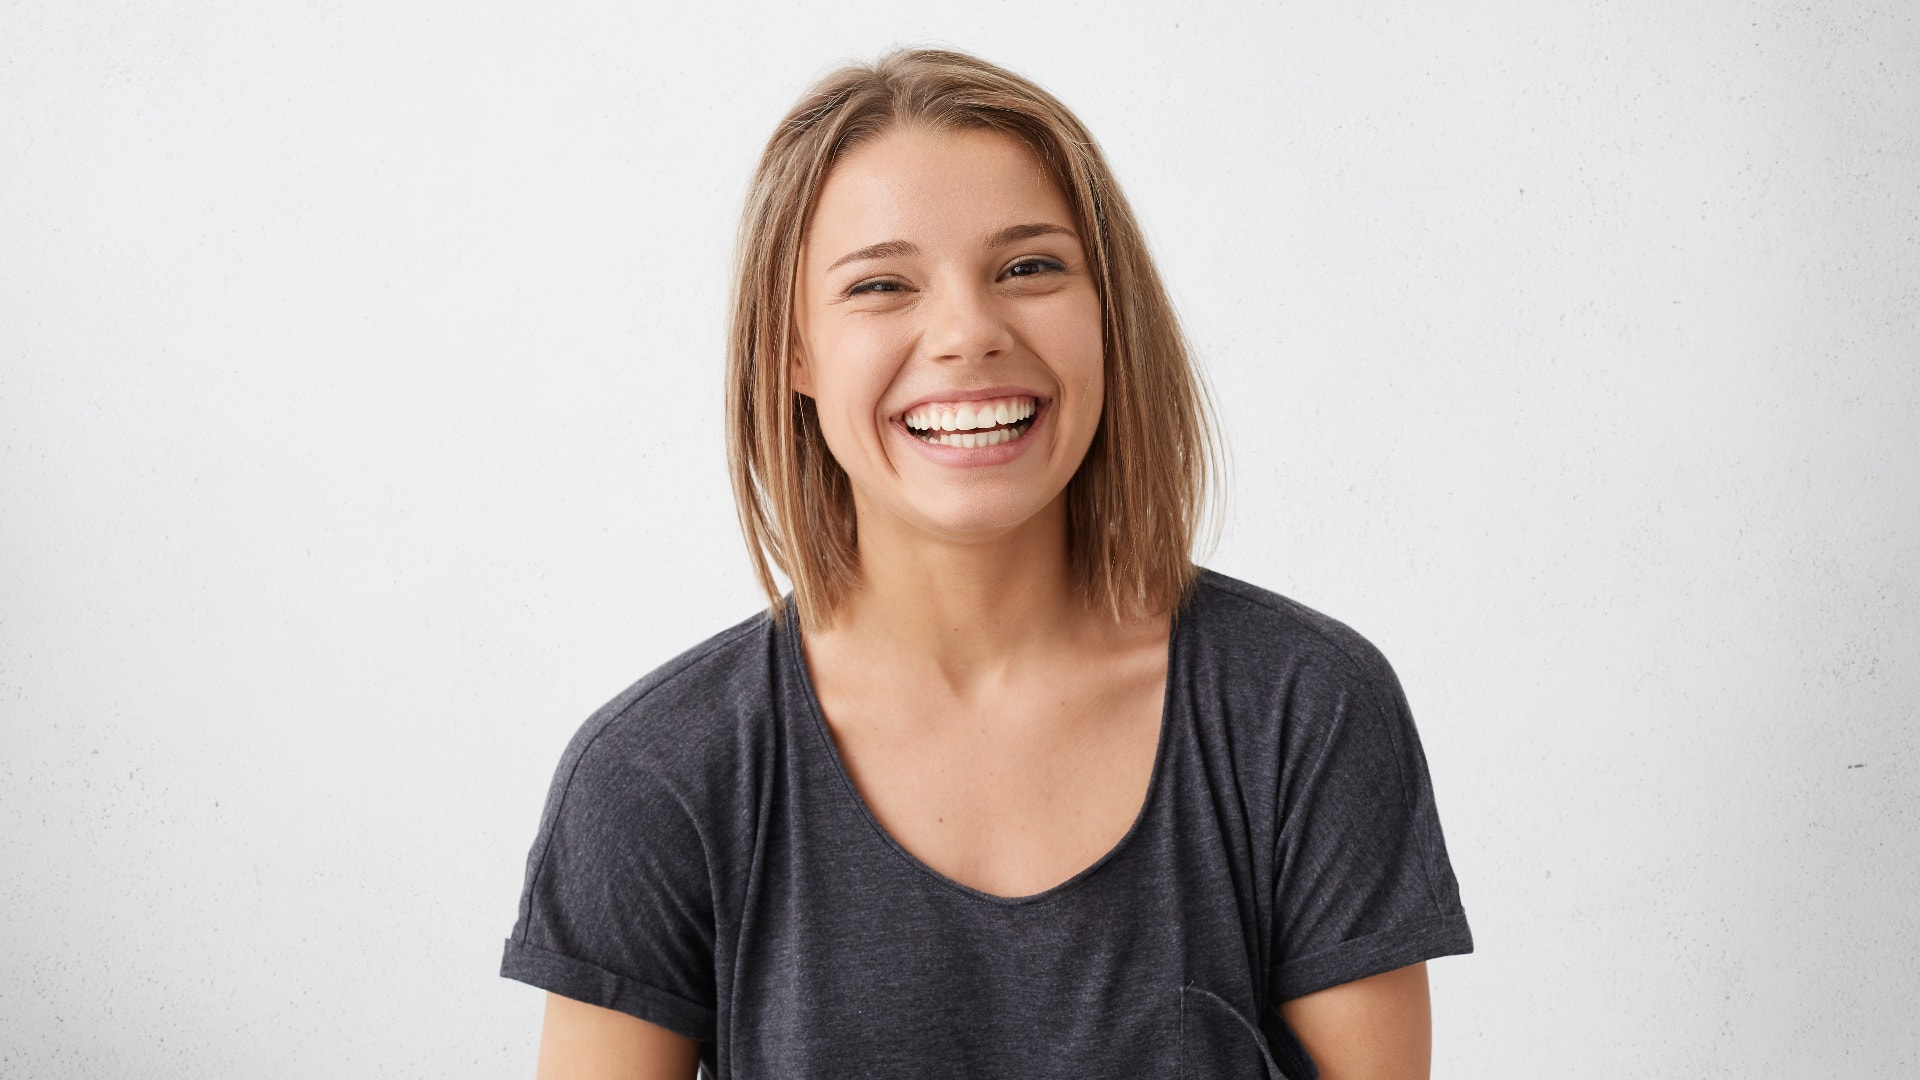 Attractive woman with short fair hair being very glad smiling with broad smile showing her perfect teeth having fun indoors. Joyful excited cheery femlae rejoicing after being proposed to marry